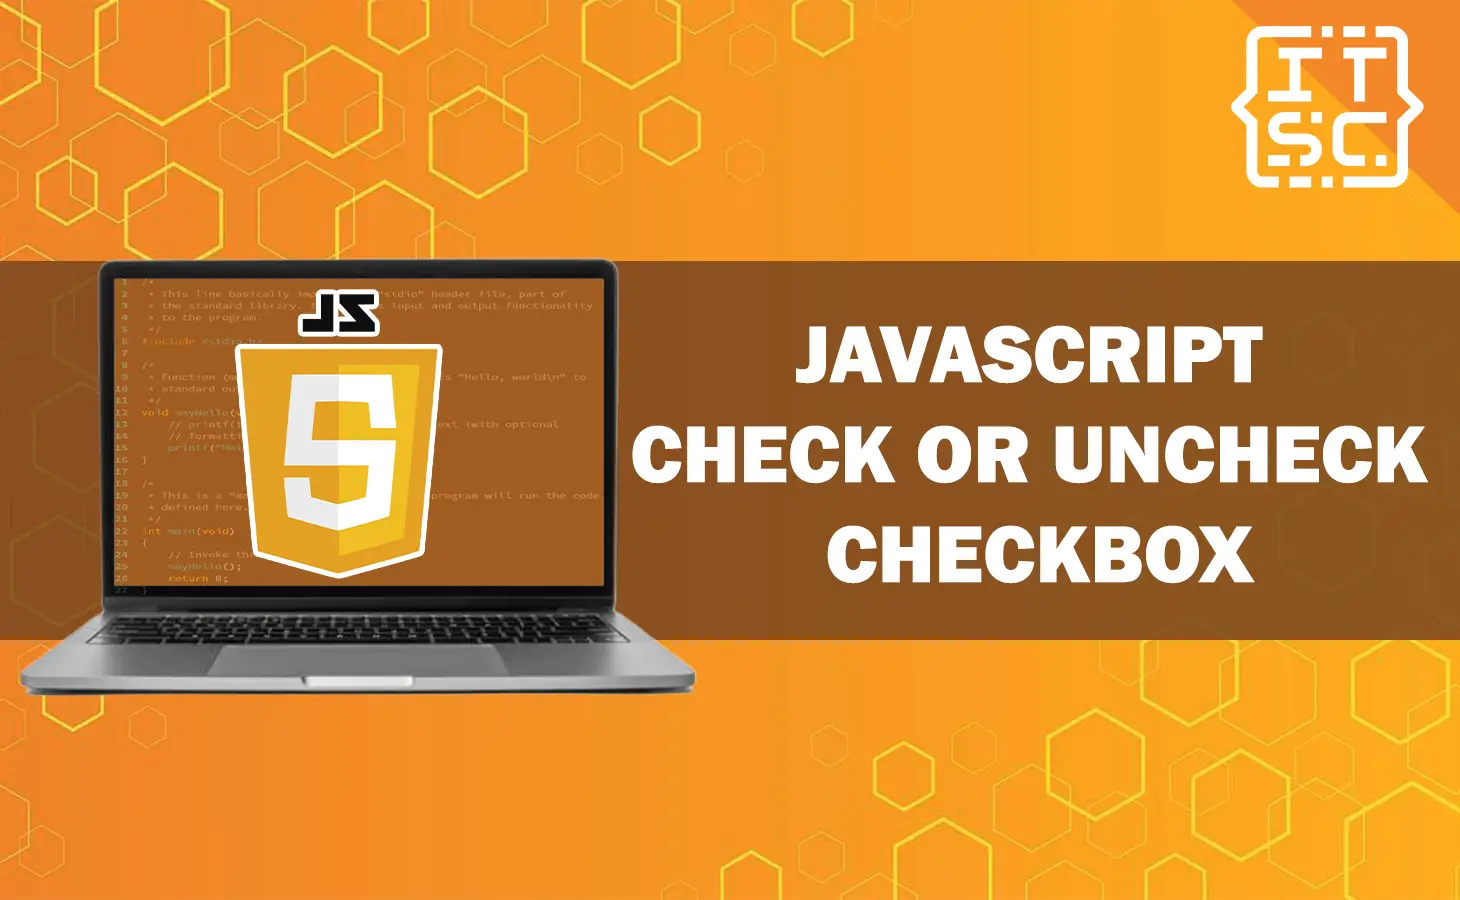 How to check and uncheck checkbox in JavaScript?